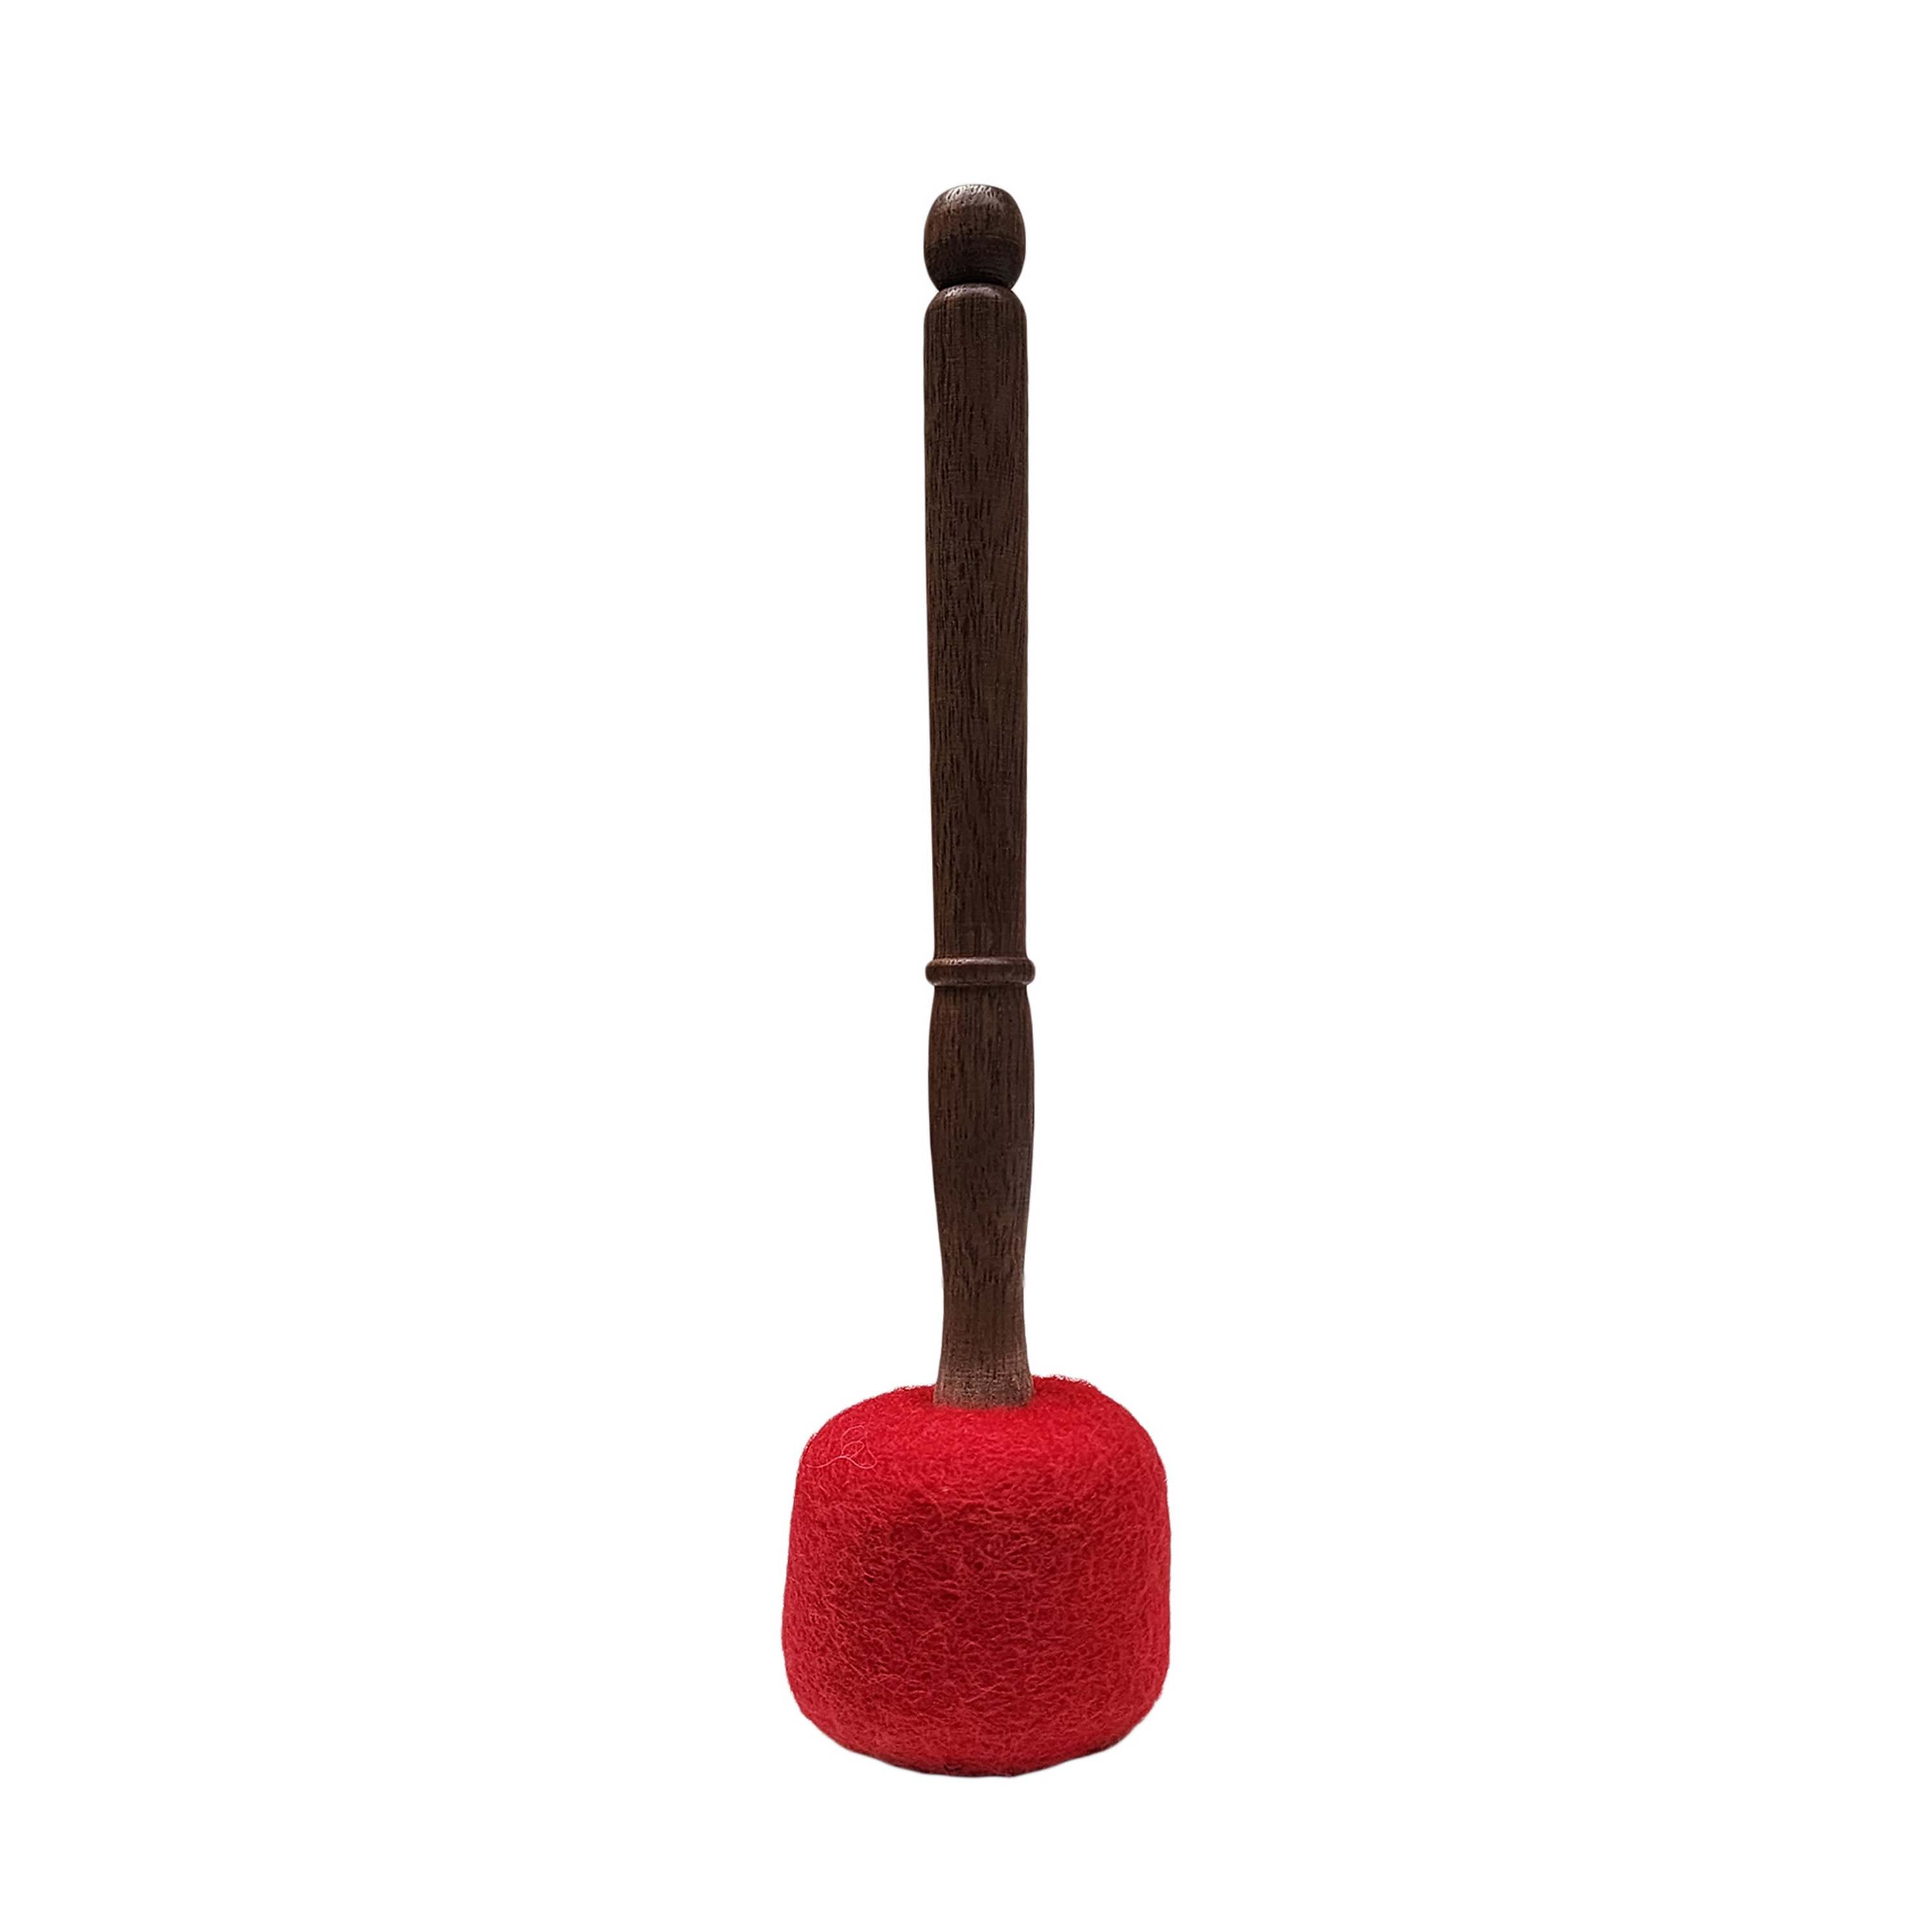 Singing Bowl Accessories, Soft Felt Beating Mallet, Small